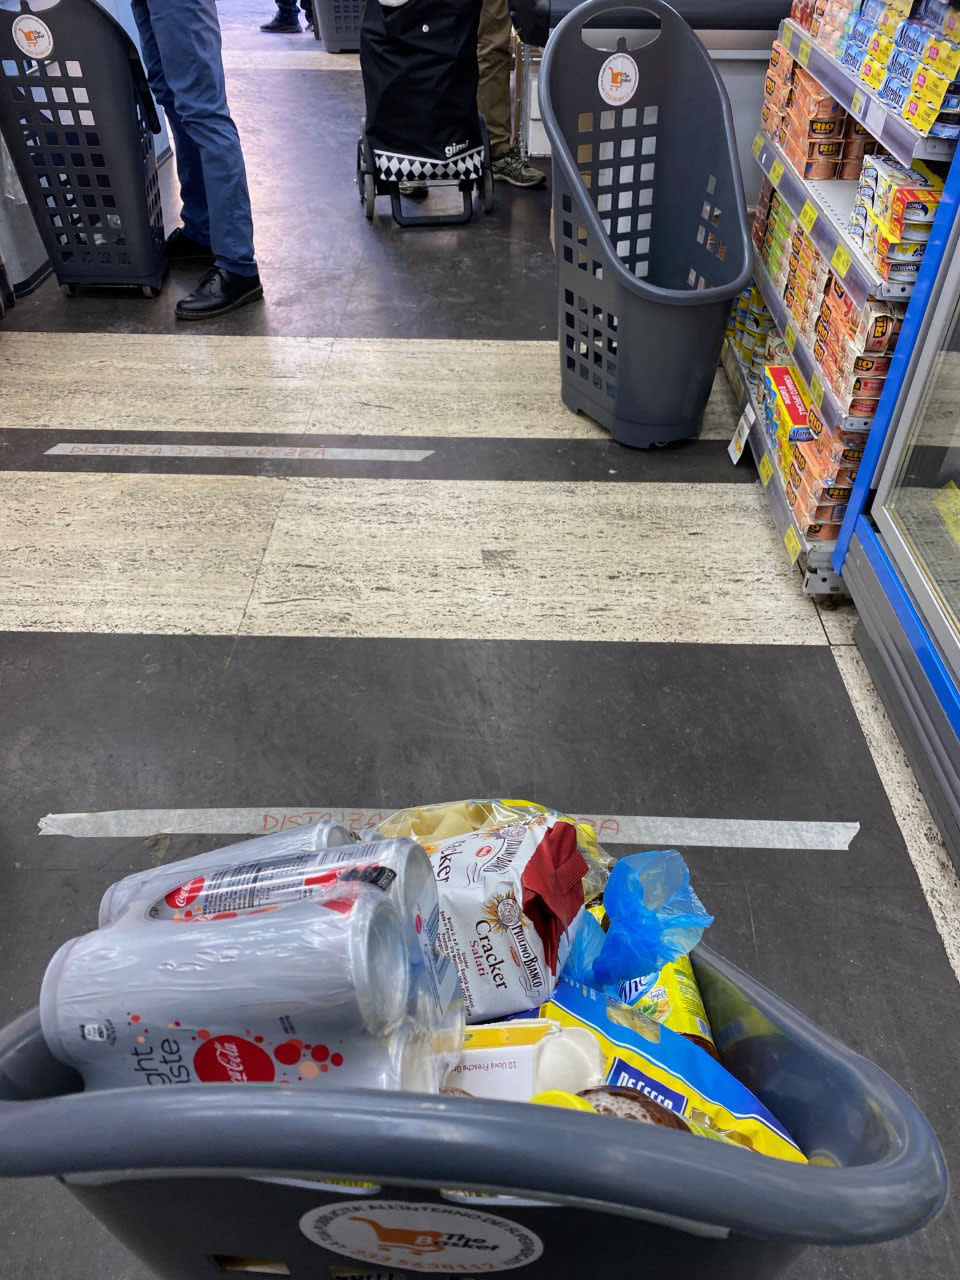 <div class="inline-image__caption"><p>Tape on the floor of the supermarket marks a safe distance between shoppers.</p></div> <div class="inline-image__credit">Barbie Nadeau/The Daily Beast</div>